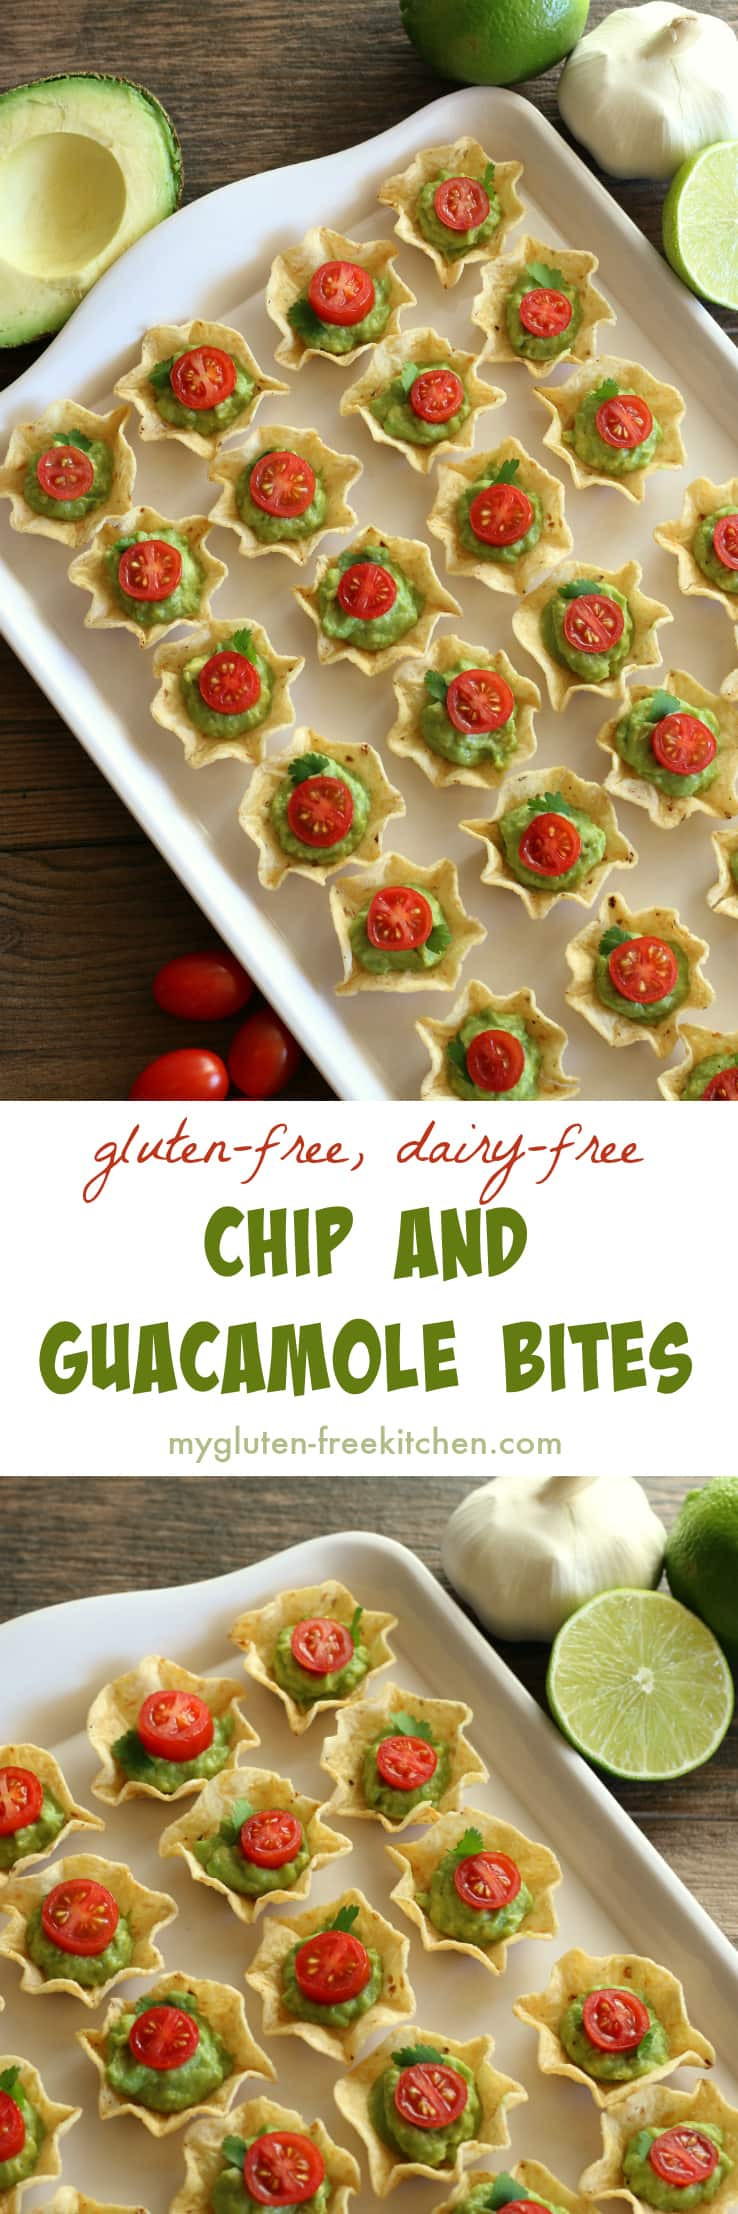 Gluten Free Appetizers For Parties
 Gluten free Chip and Guacamole Bites